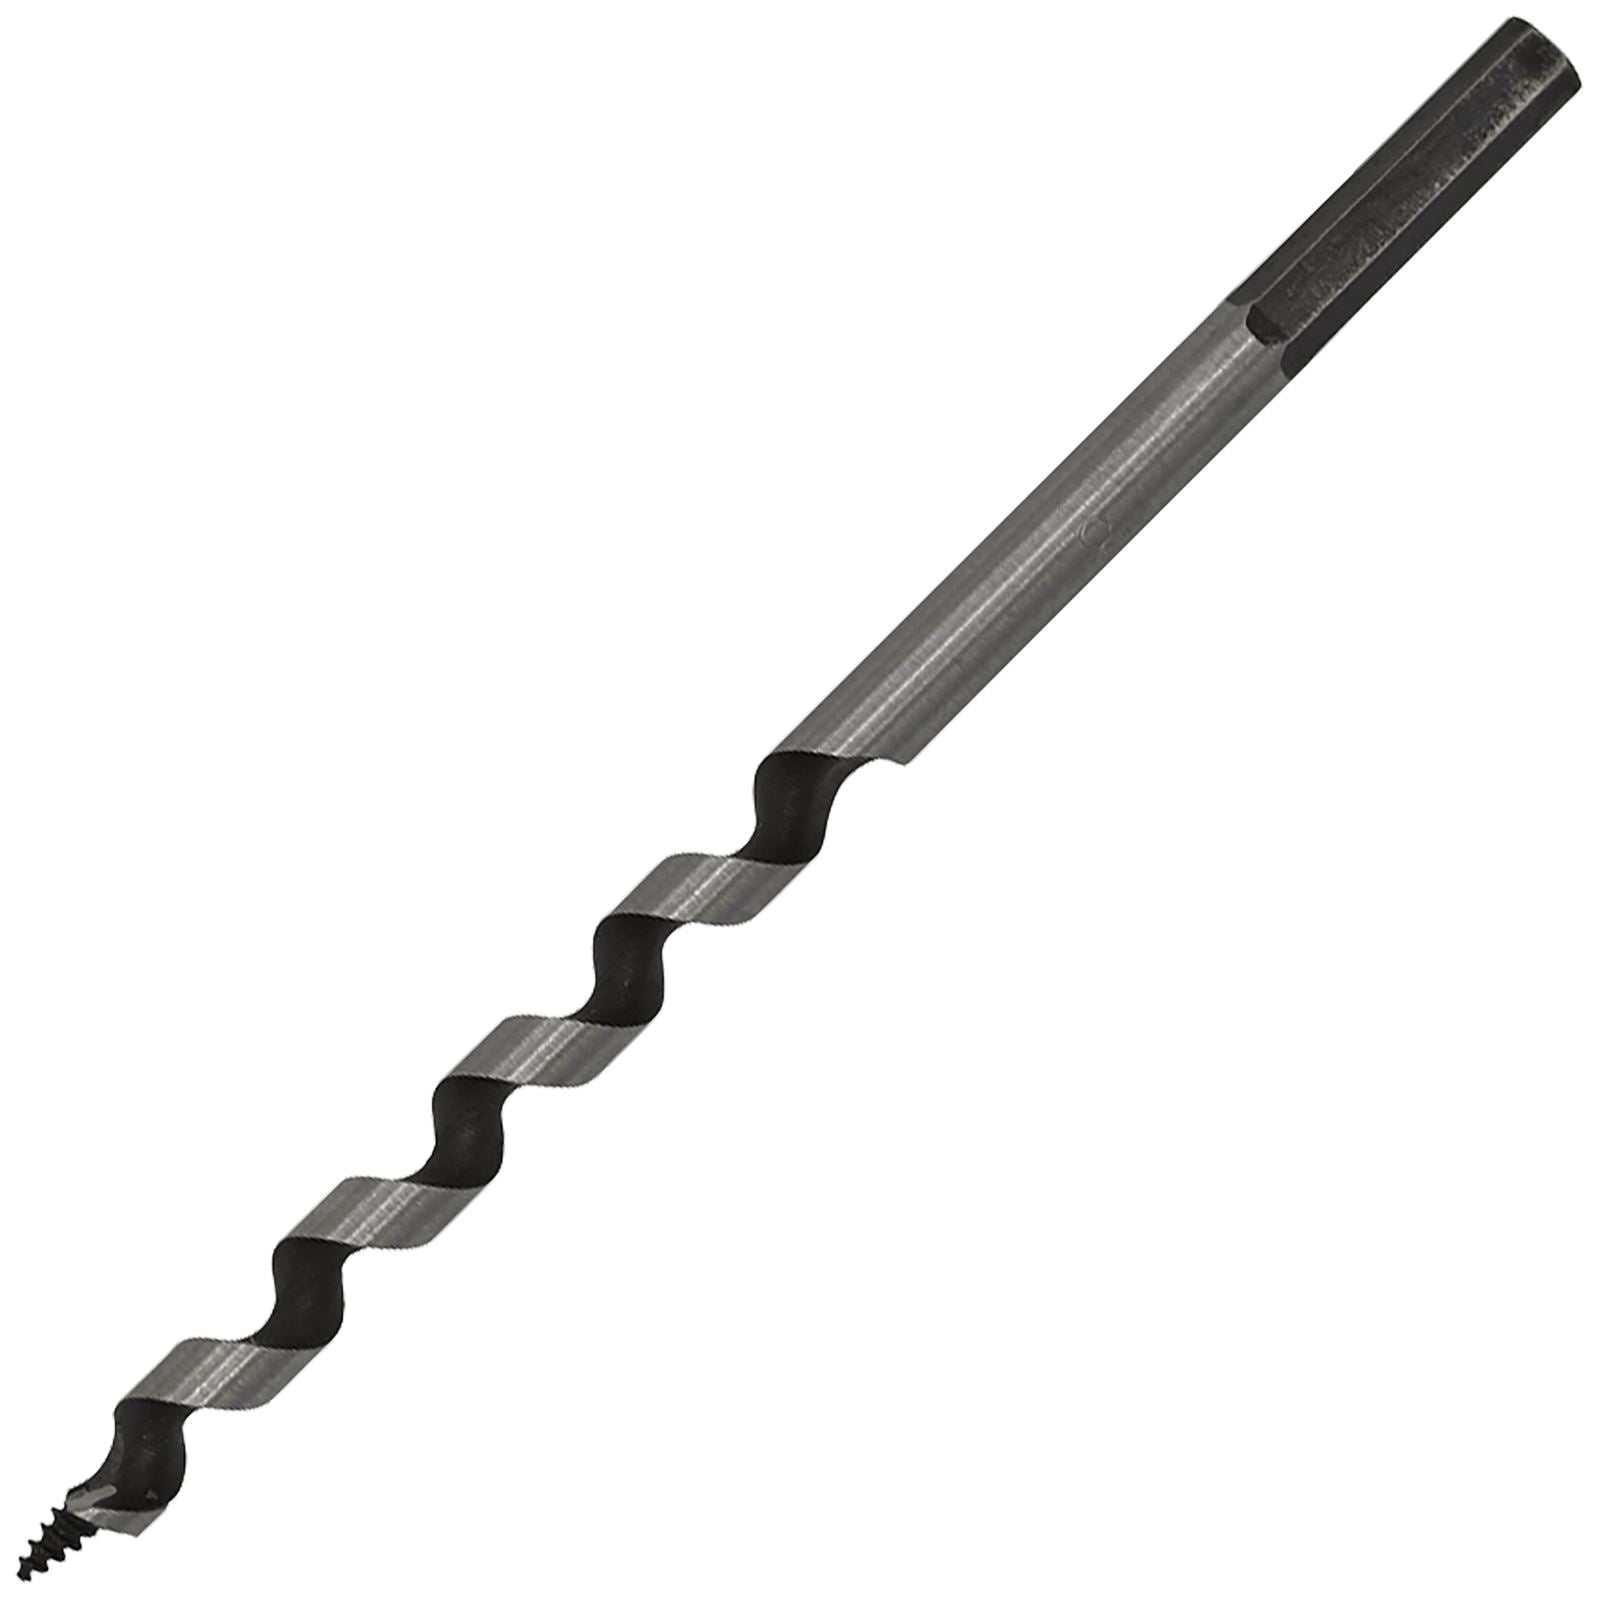 Worksafe by Sealey Auger Wood Drill Bit 8mm x 155mm